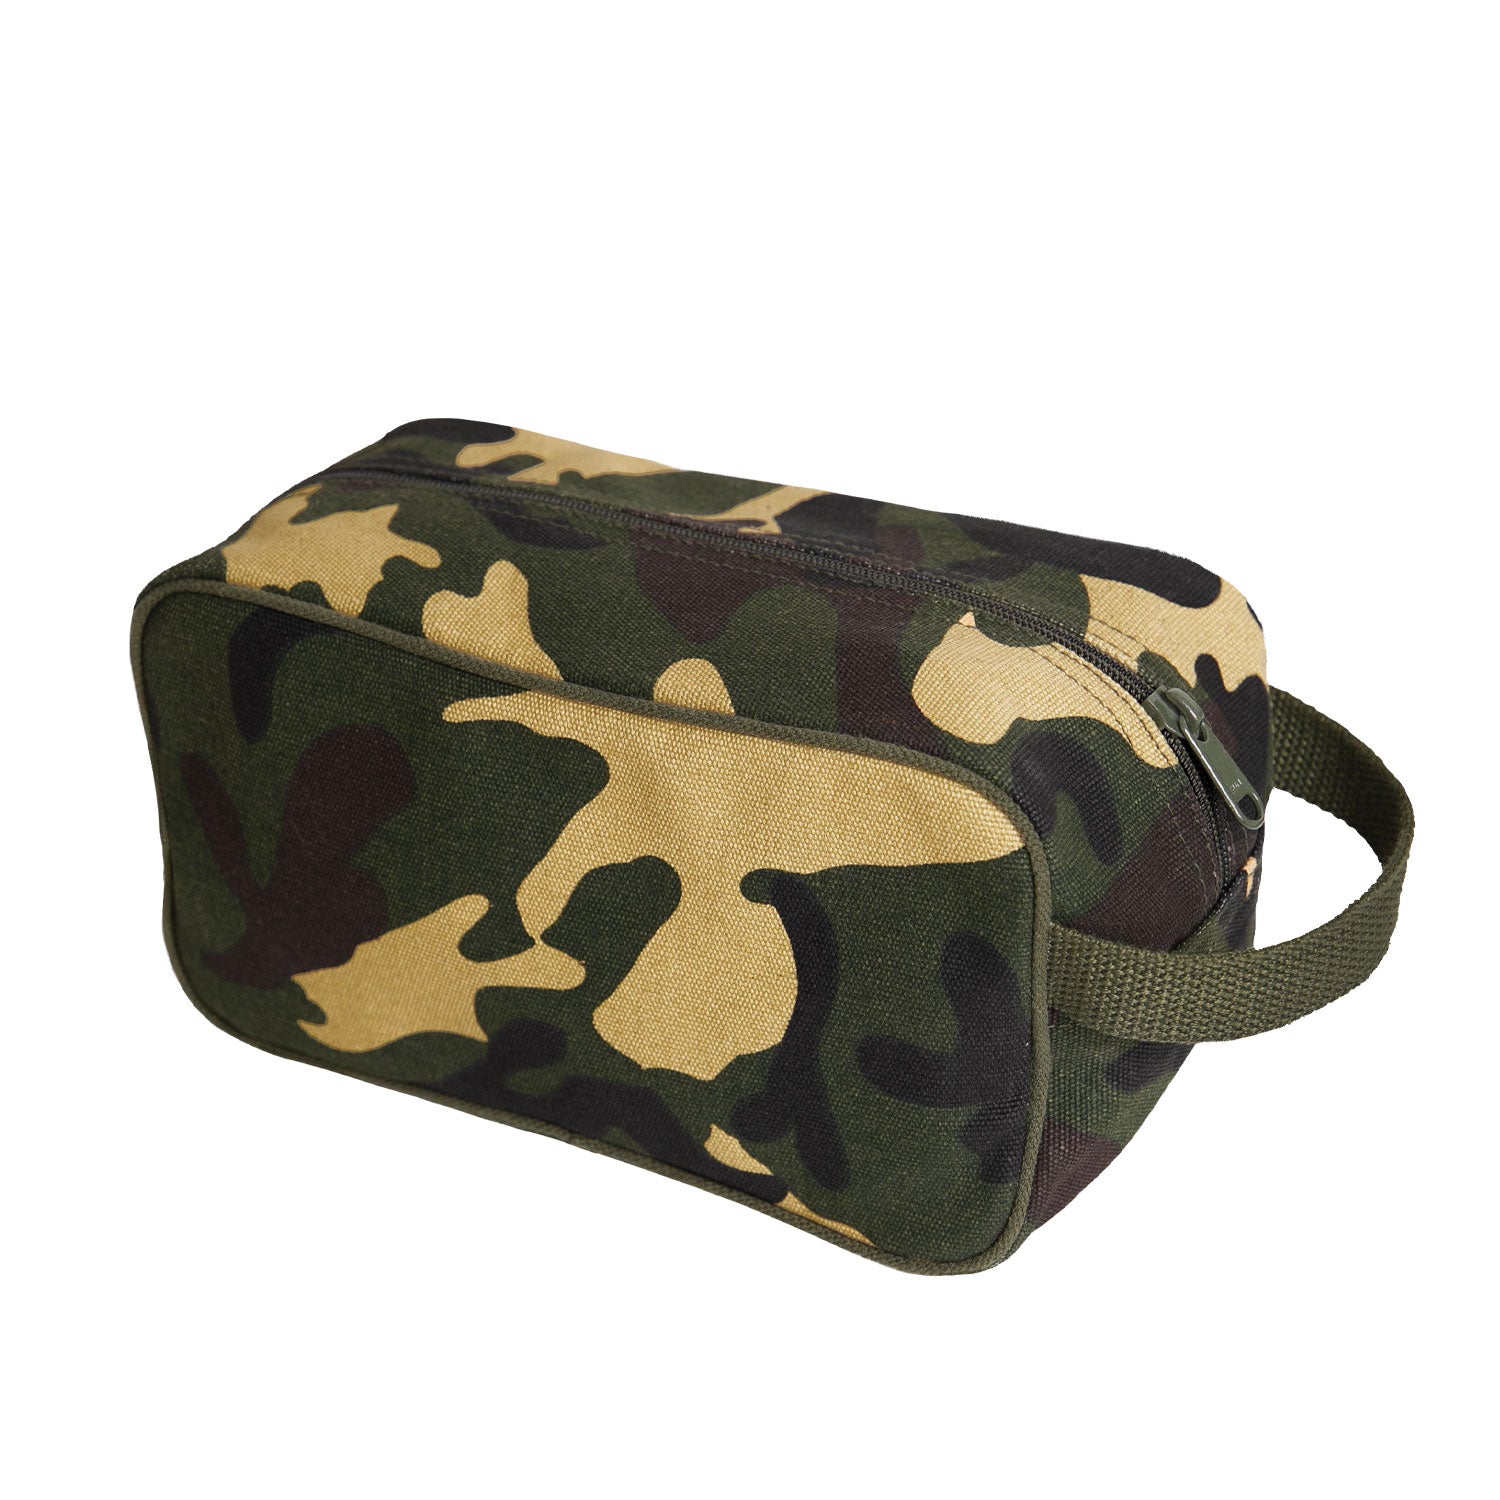 Milspec Canvas Travel Kit Gifts For Him MilTac Tactical Military Outdoor Gear Australia